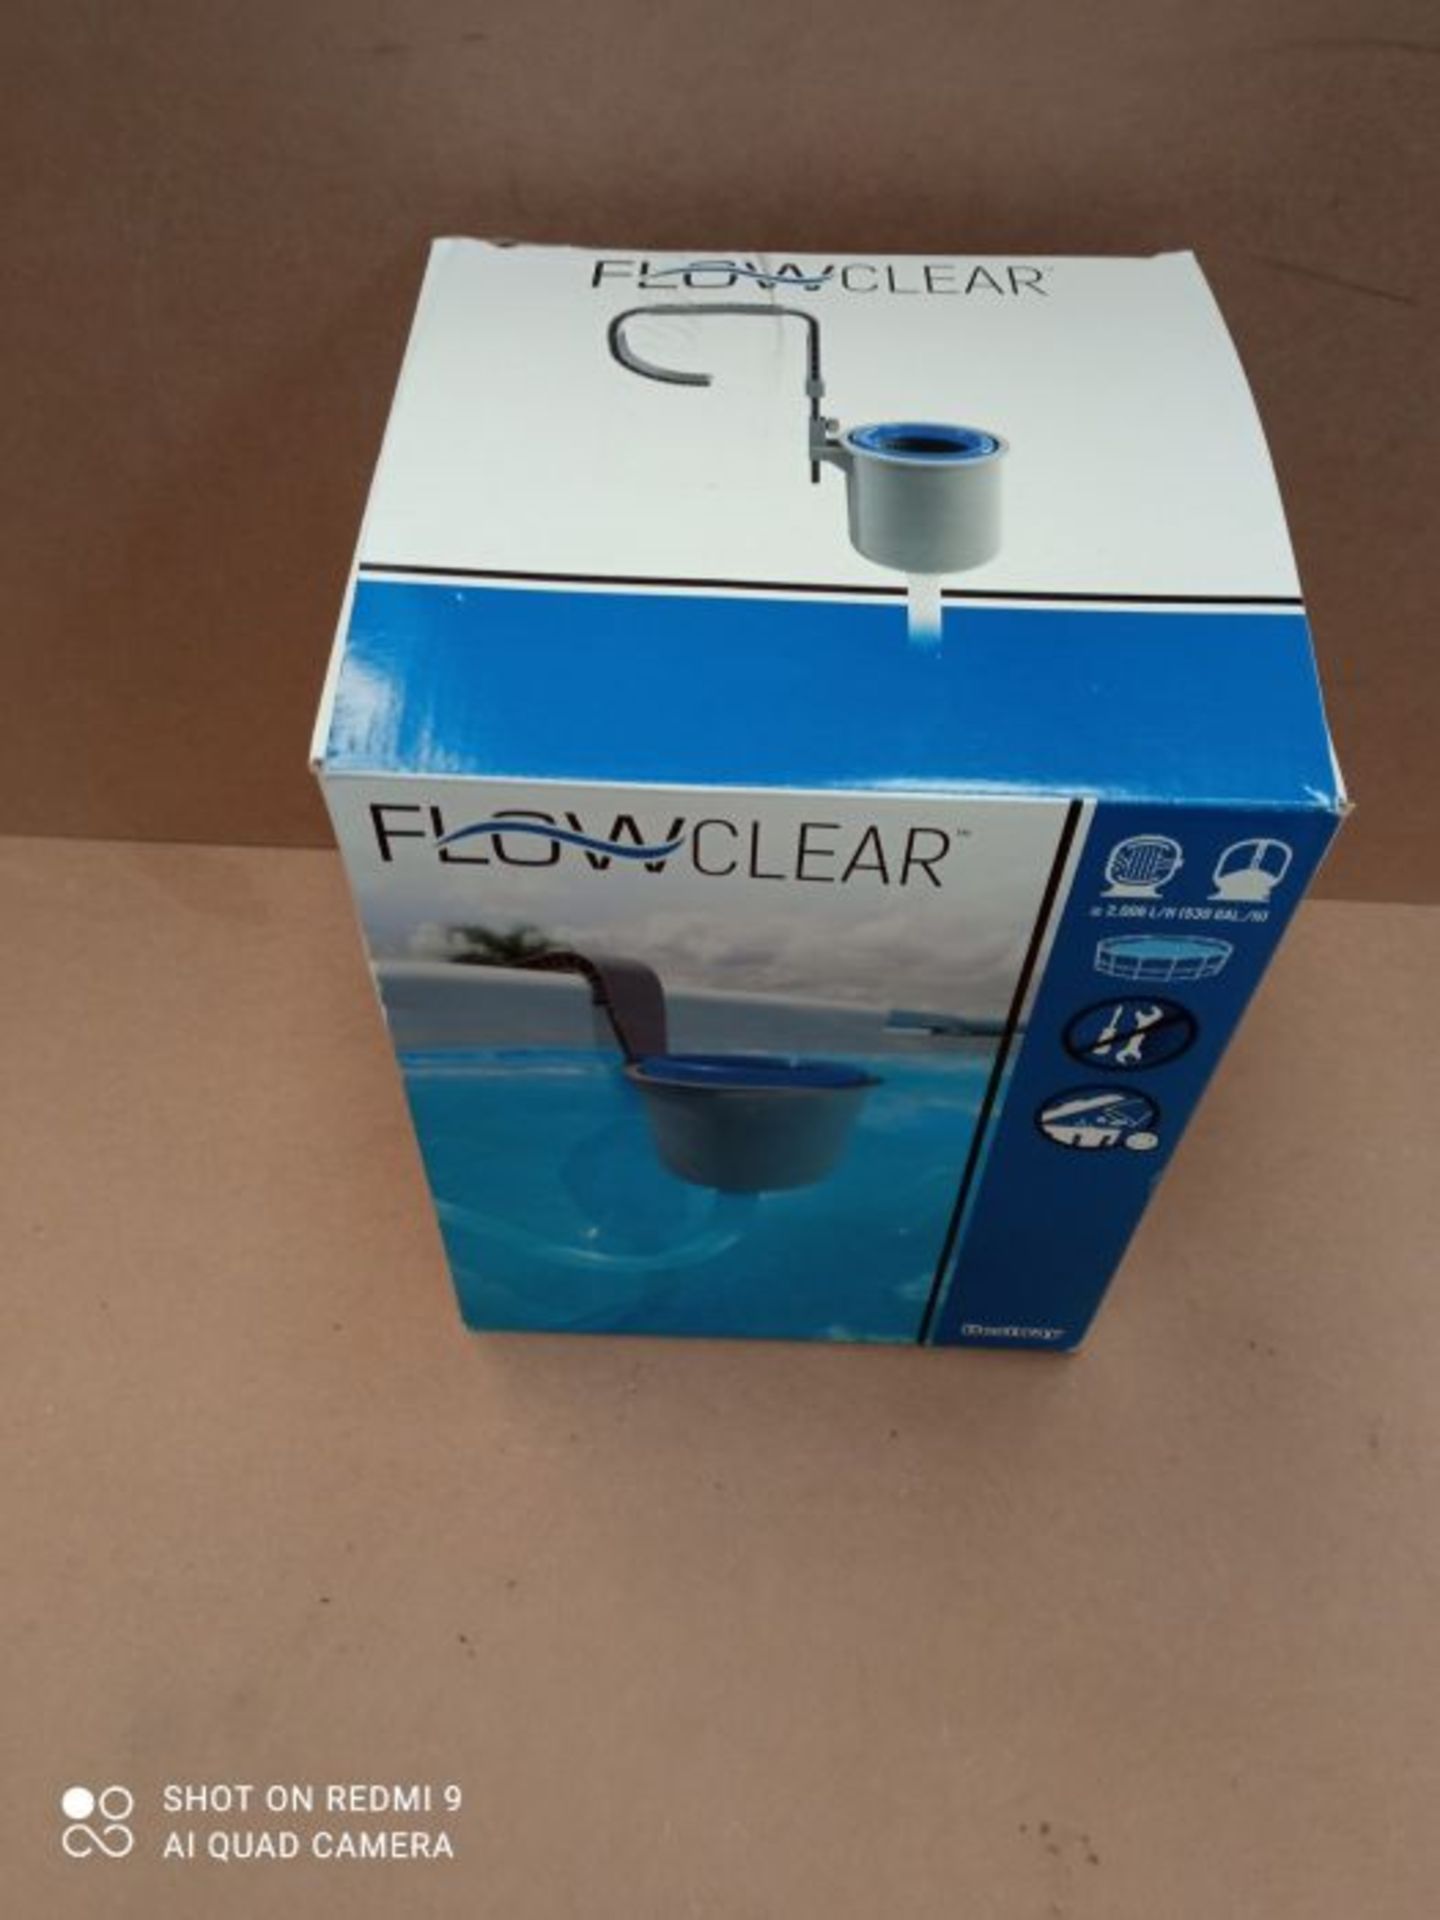 Bestway 58233 Flowclear Hanging Skimmer for Filter Systems - Image 5 of 5